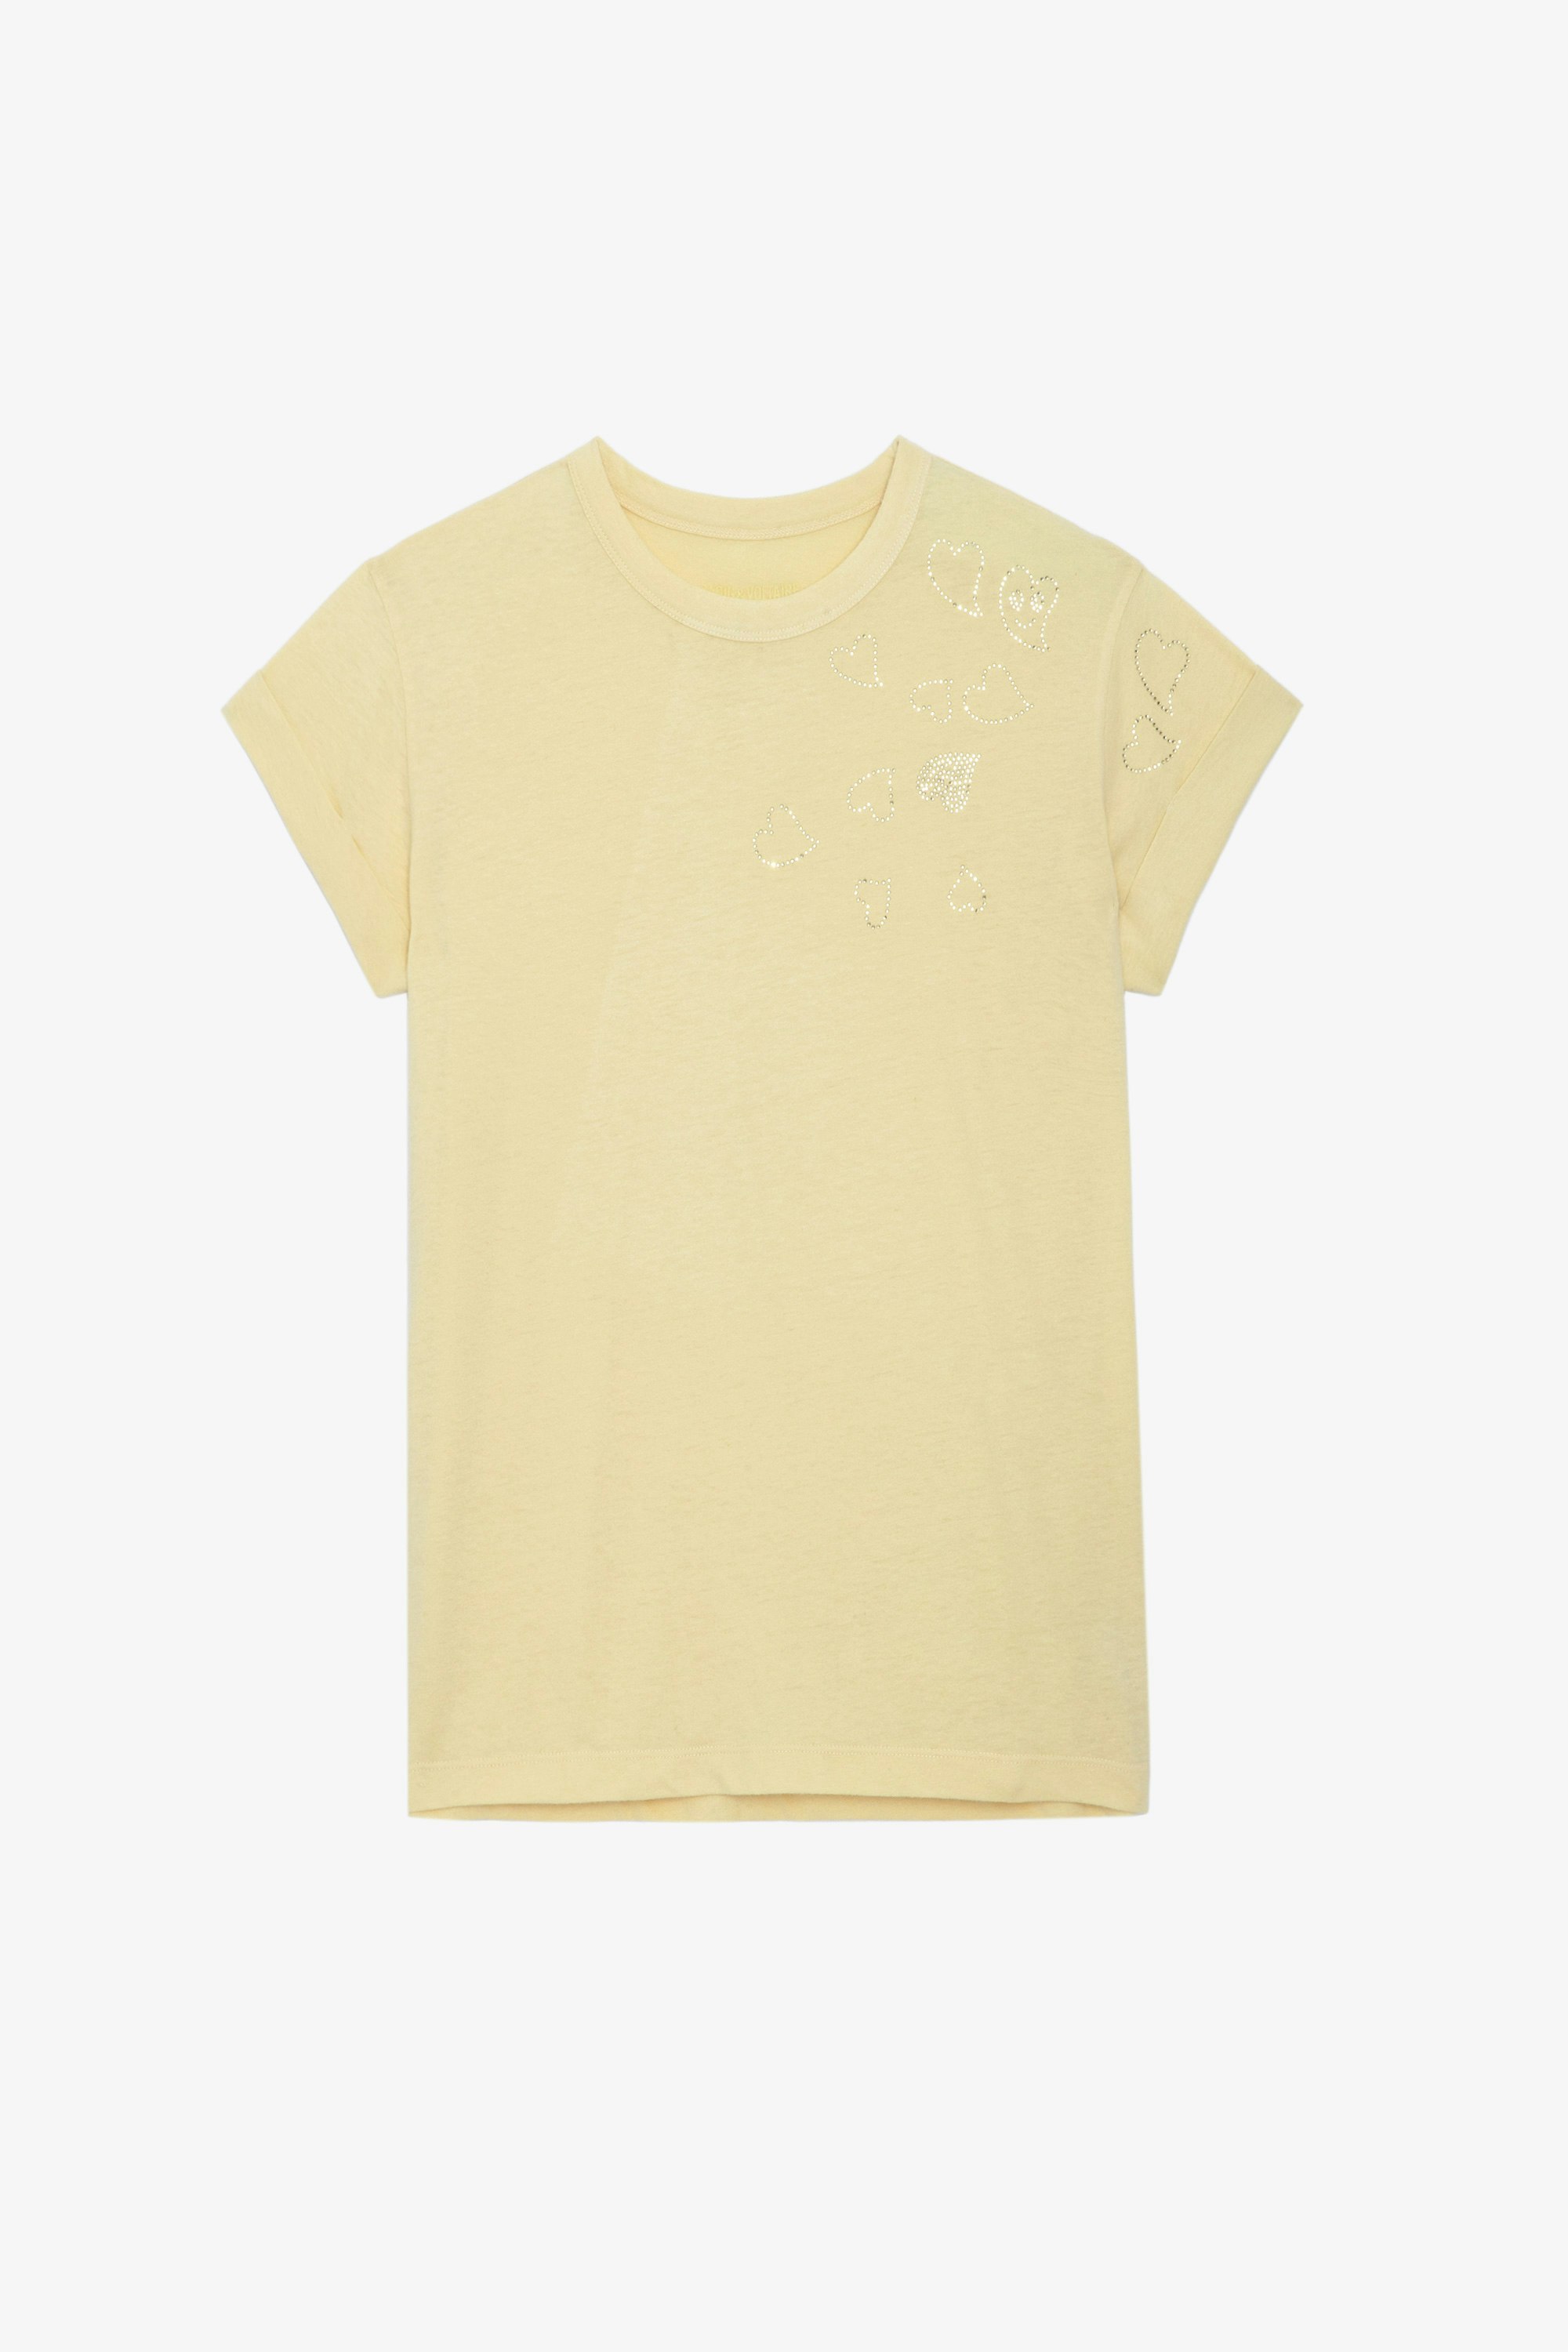 Anya Diamanté T-shirt - Light yellow round-neck T-shirt with short sleeves and diamanté hearts.